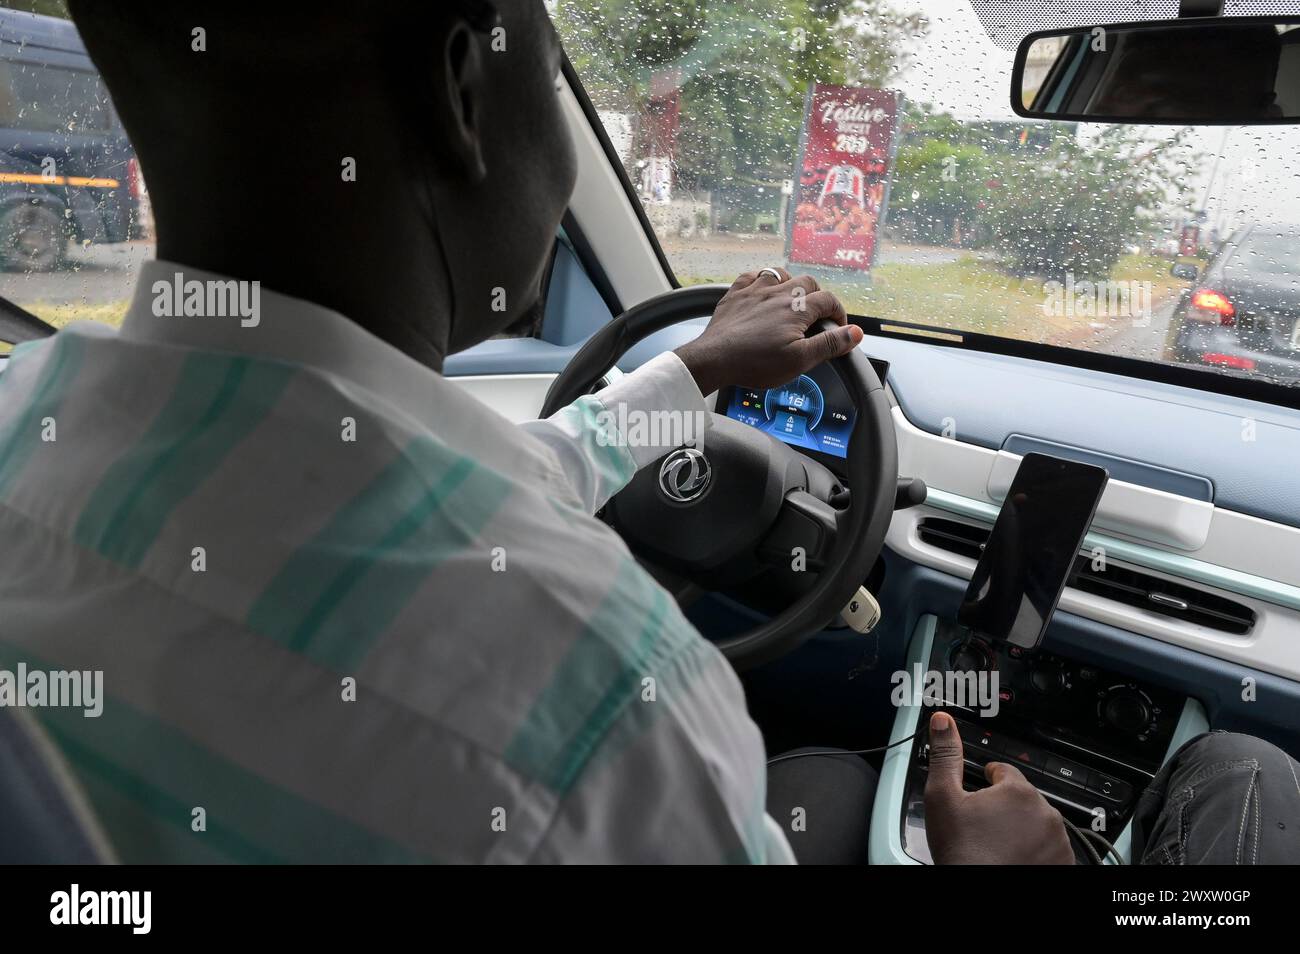 GHANA, Accra, electric mobility, Taxi and Bolt driver Frederick drives a from startup IJANU leased chinese Dongfeng EX1 electric car / GHANA, Accra, E-Mobilität, Taxi und Bolt Fahrer Frederick fährt ein von dem startup IJANU geleastes chinesisches Dongfeng EX1 E-Auto Stock Photo